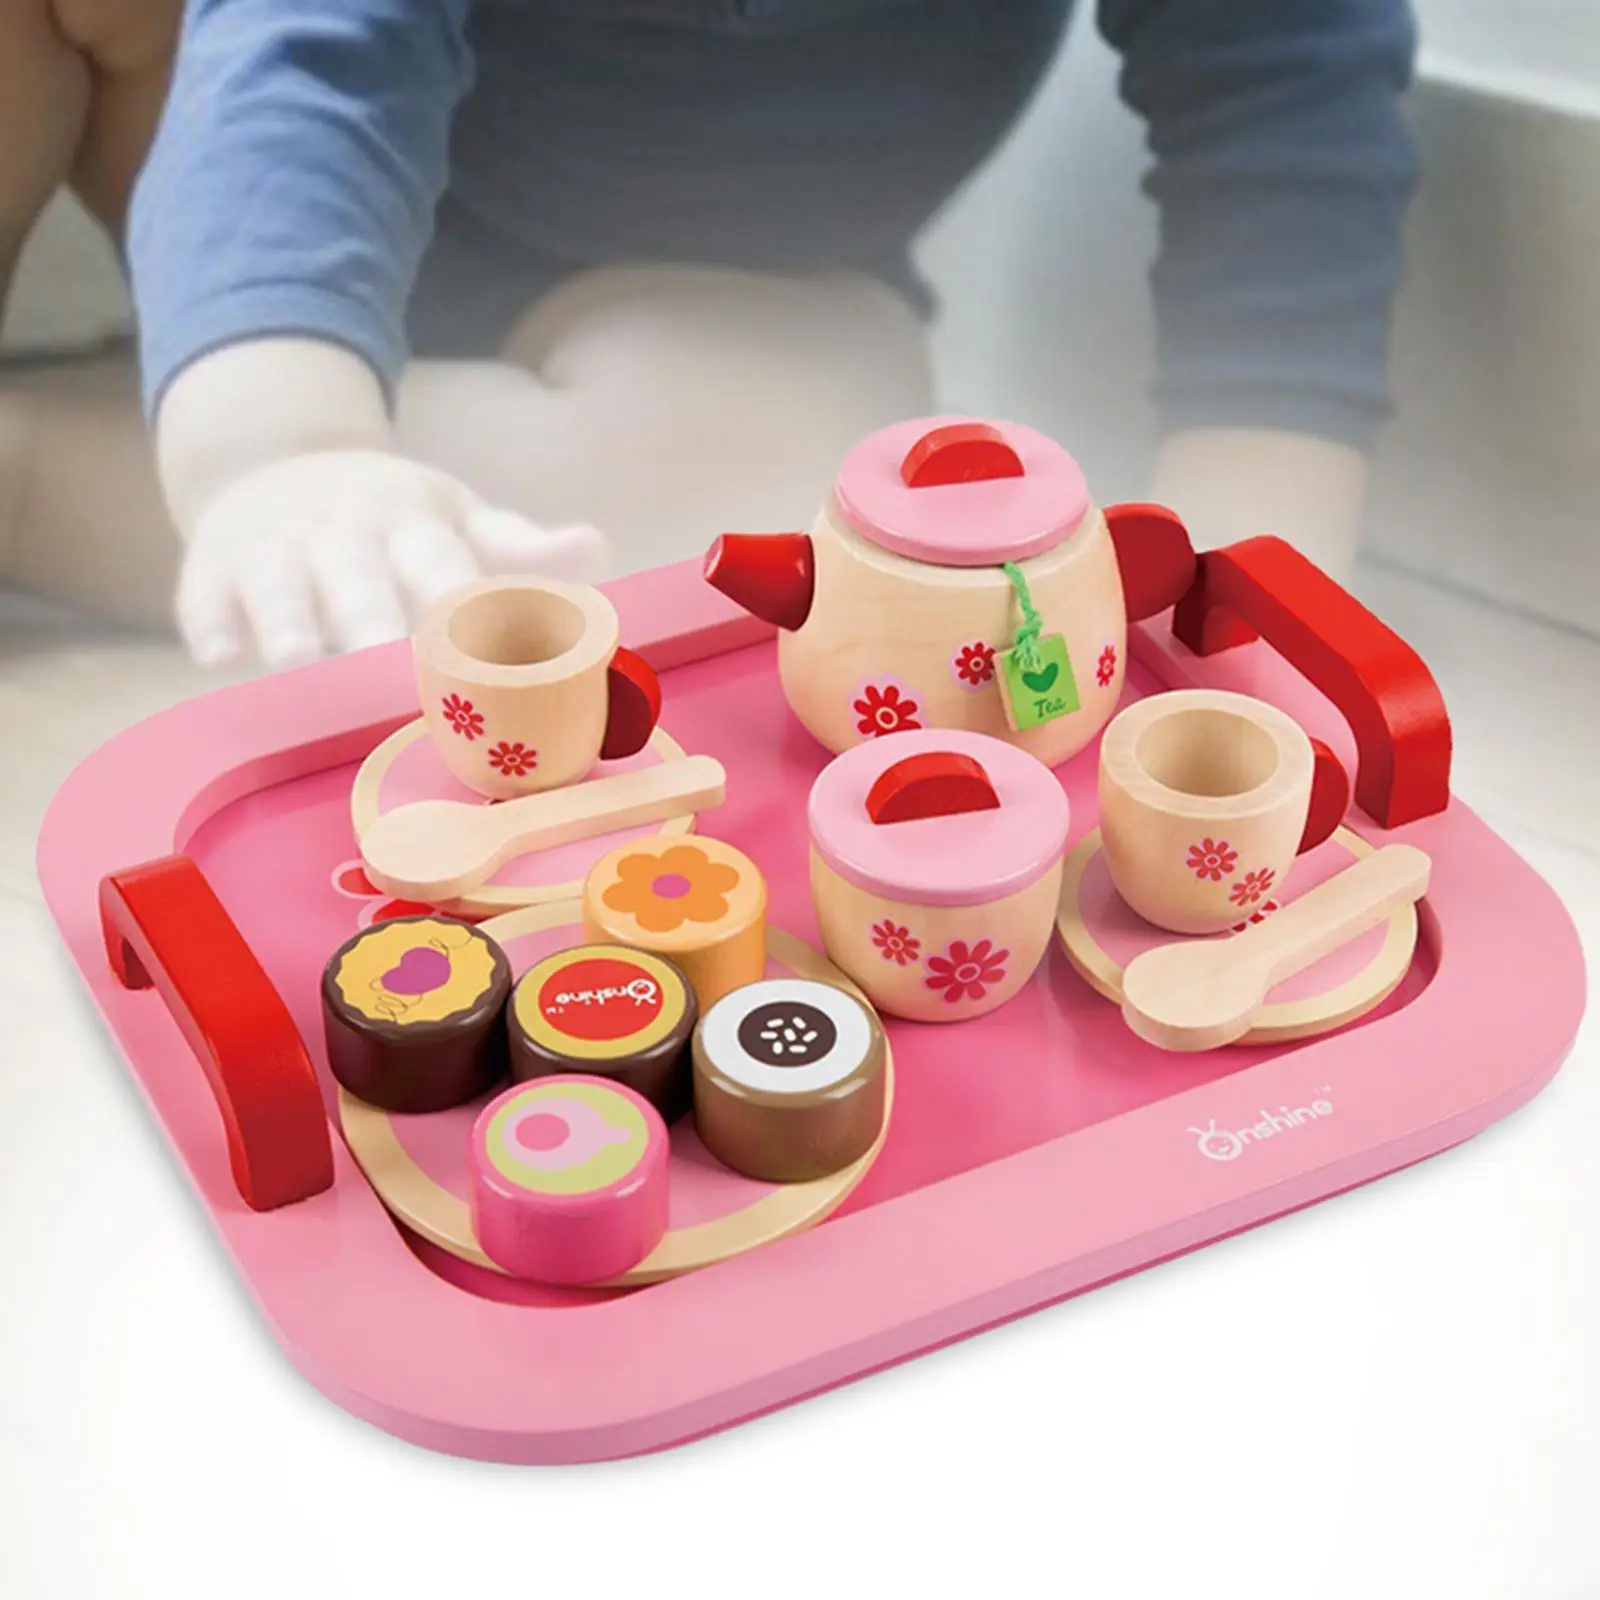 Wooden Pretend Play Tea Party Set Simulation Teacup Toy for Children Toddler